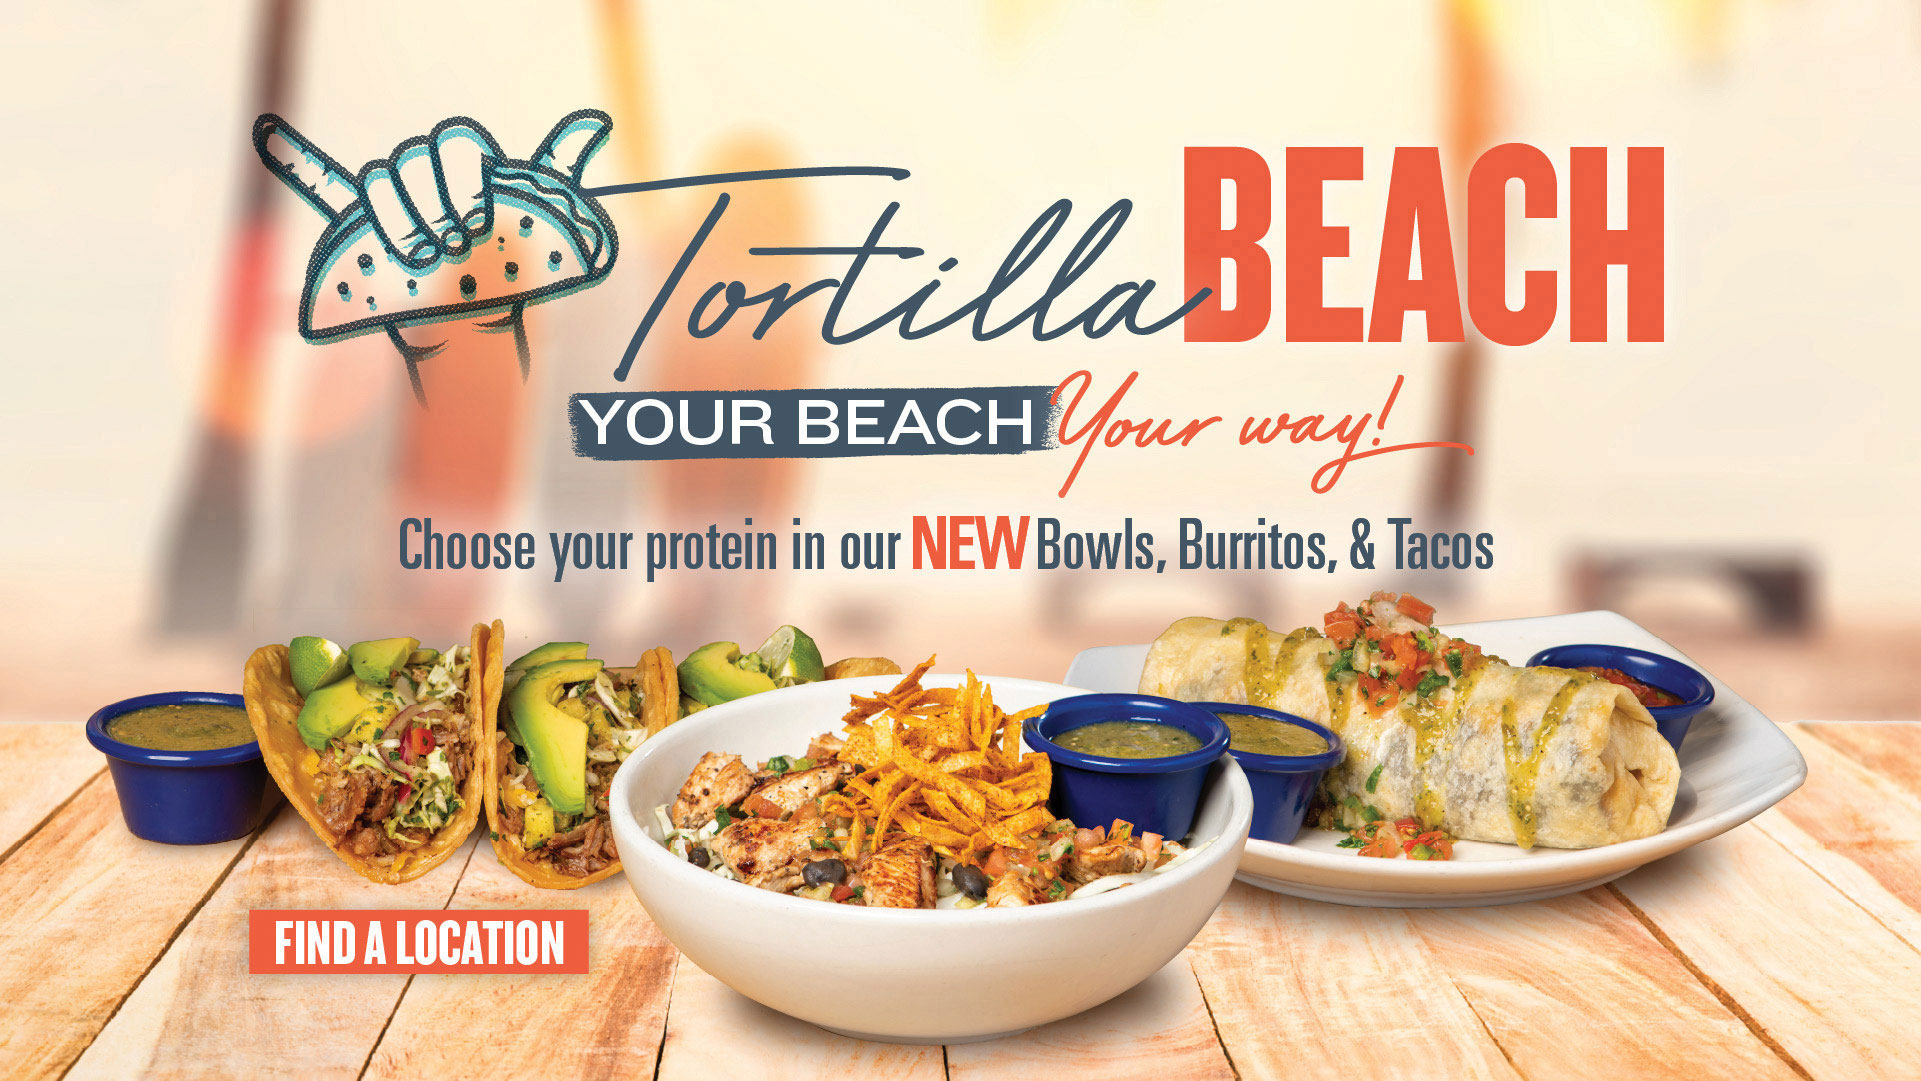 Introducing Tortilla Beach - Your Beach, Your Way!  Choose your protein in our NEW Bowls, Burritos, & Tacos.  Click to FIND A LOCATION.